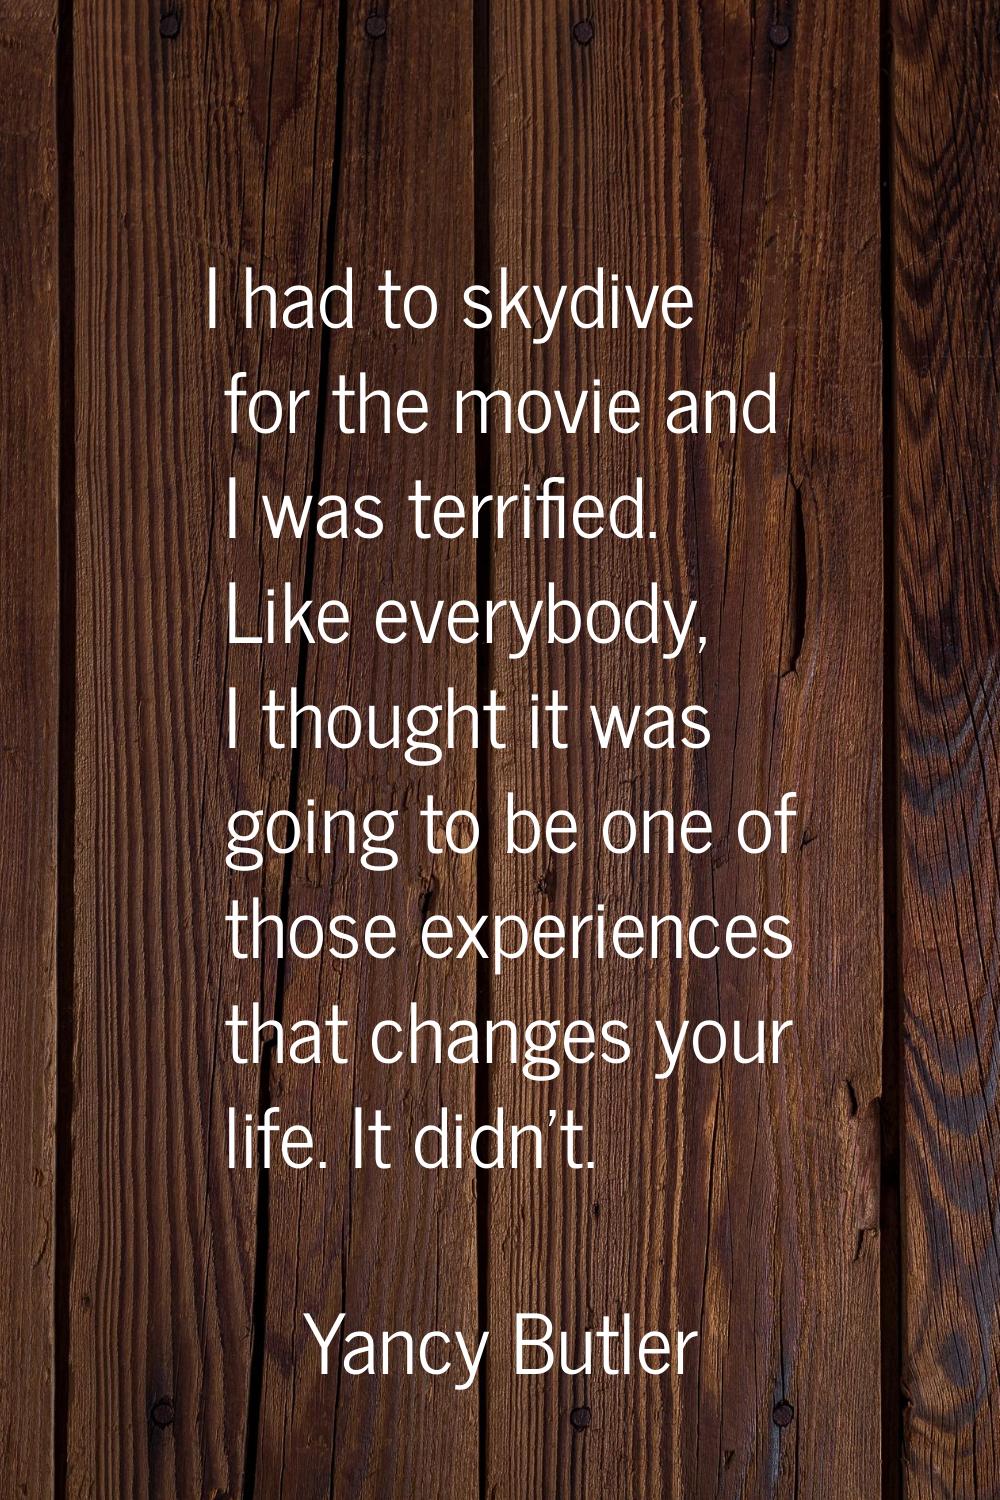 I had to skydive for the movie and I was terrified. Like everybody, I thought it was going to be on